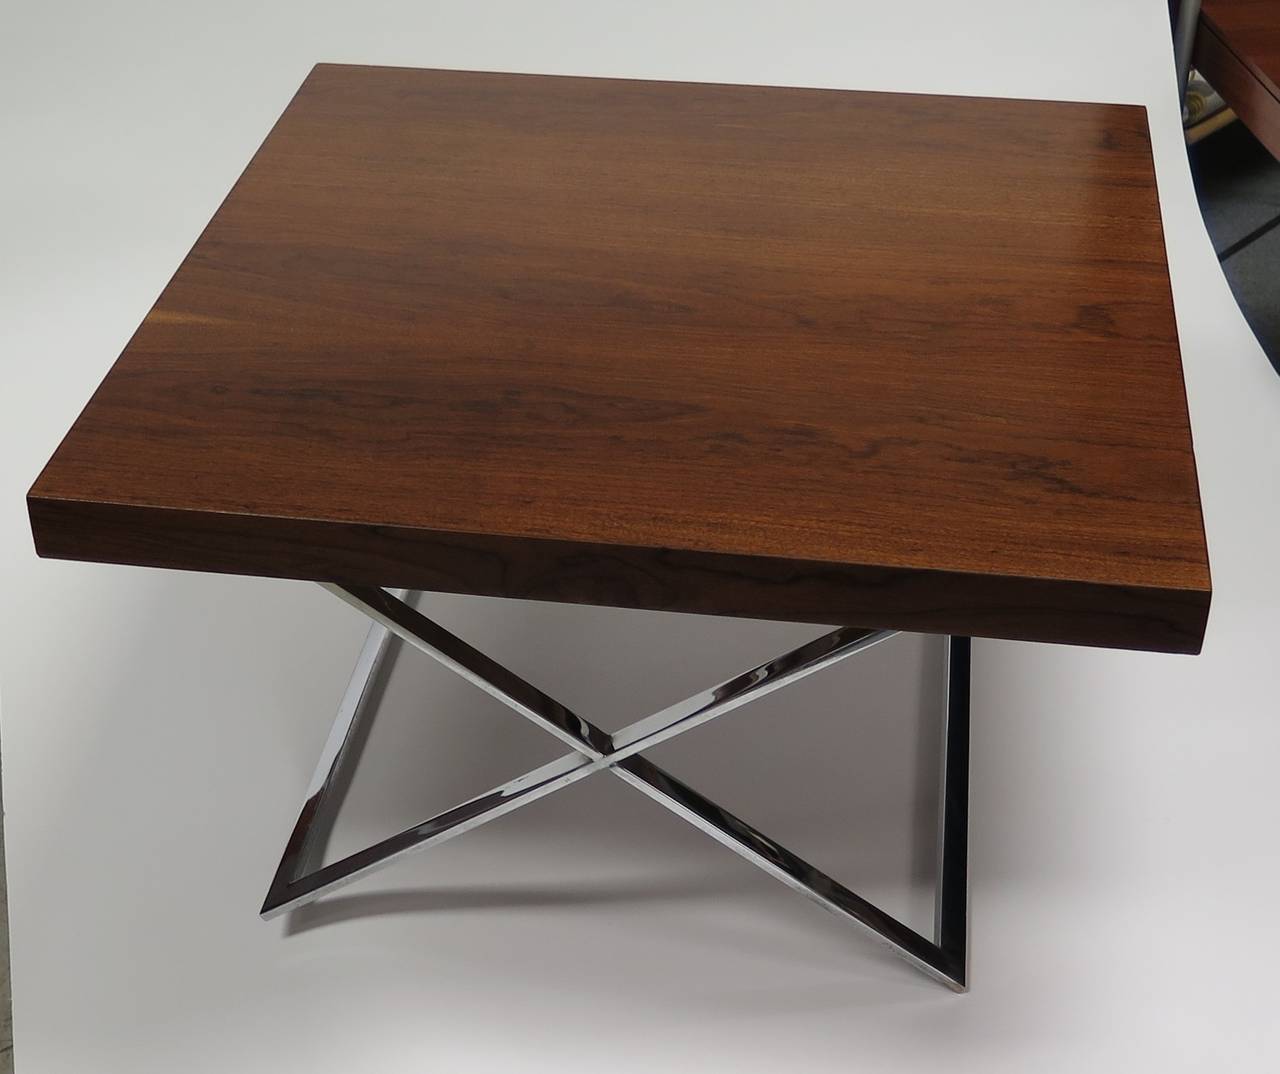 Restored walnut top. Solid chrome base. Small grey area on chrome, otherwise in excellent condition. Versatile piece.